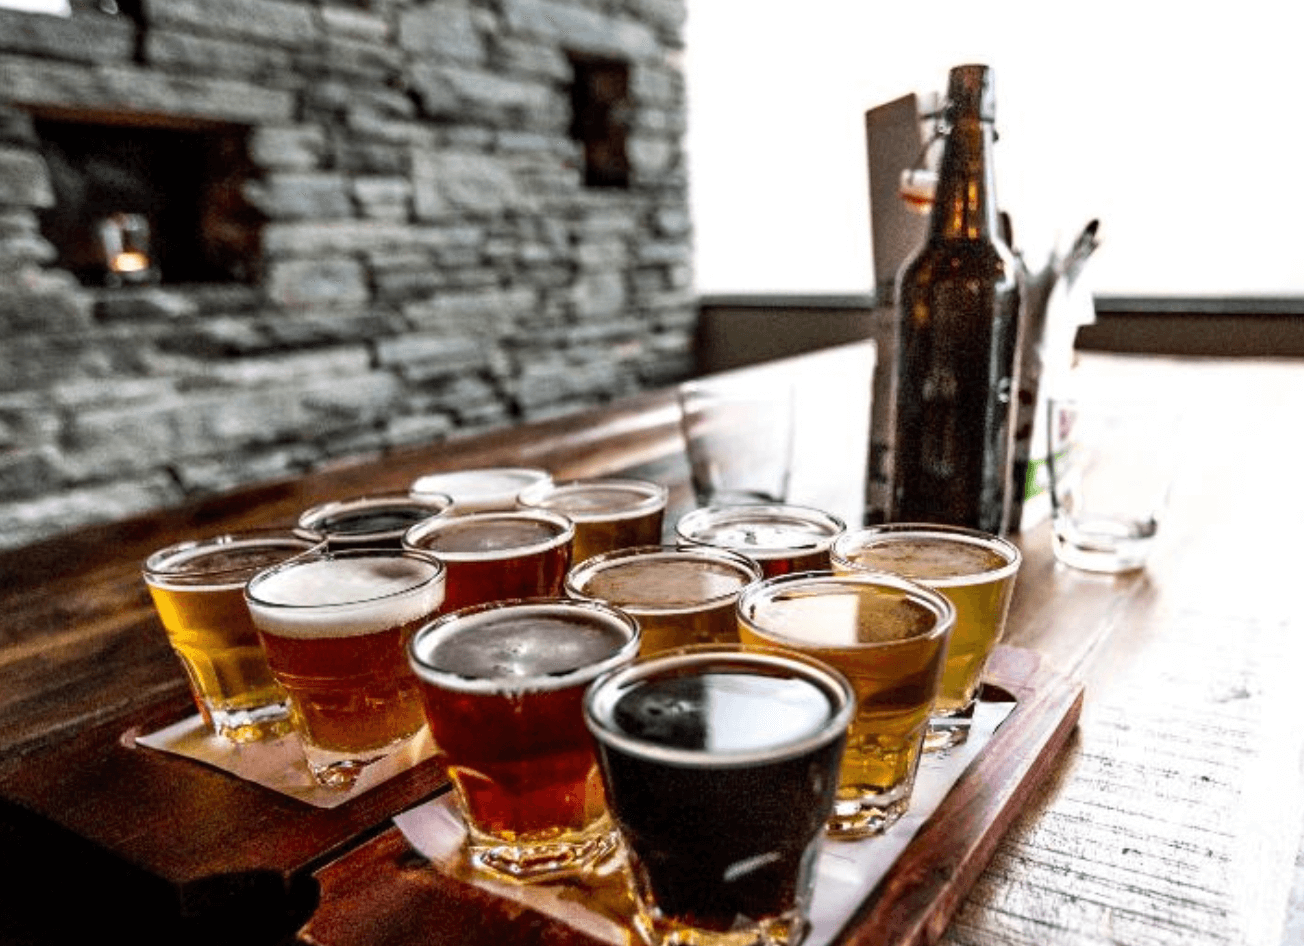 Smith’s Craft Beer House Special –  Flight of 4 beers for $20 (200ml)